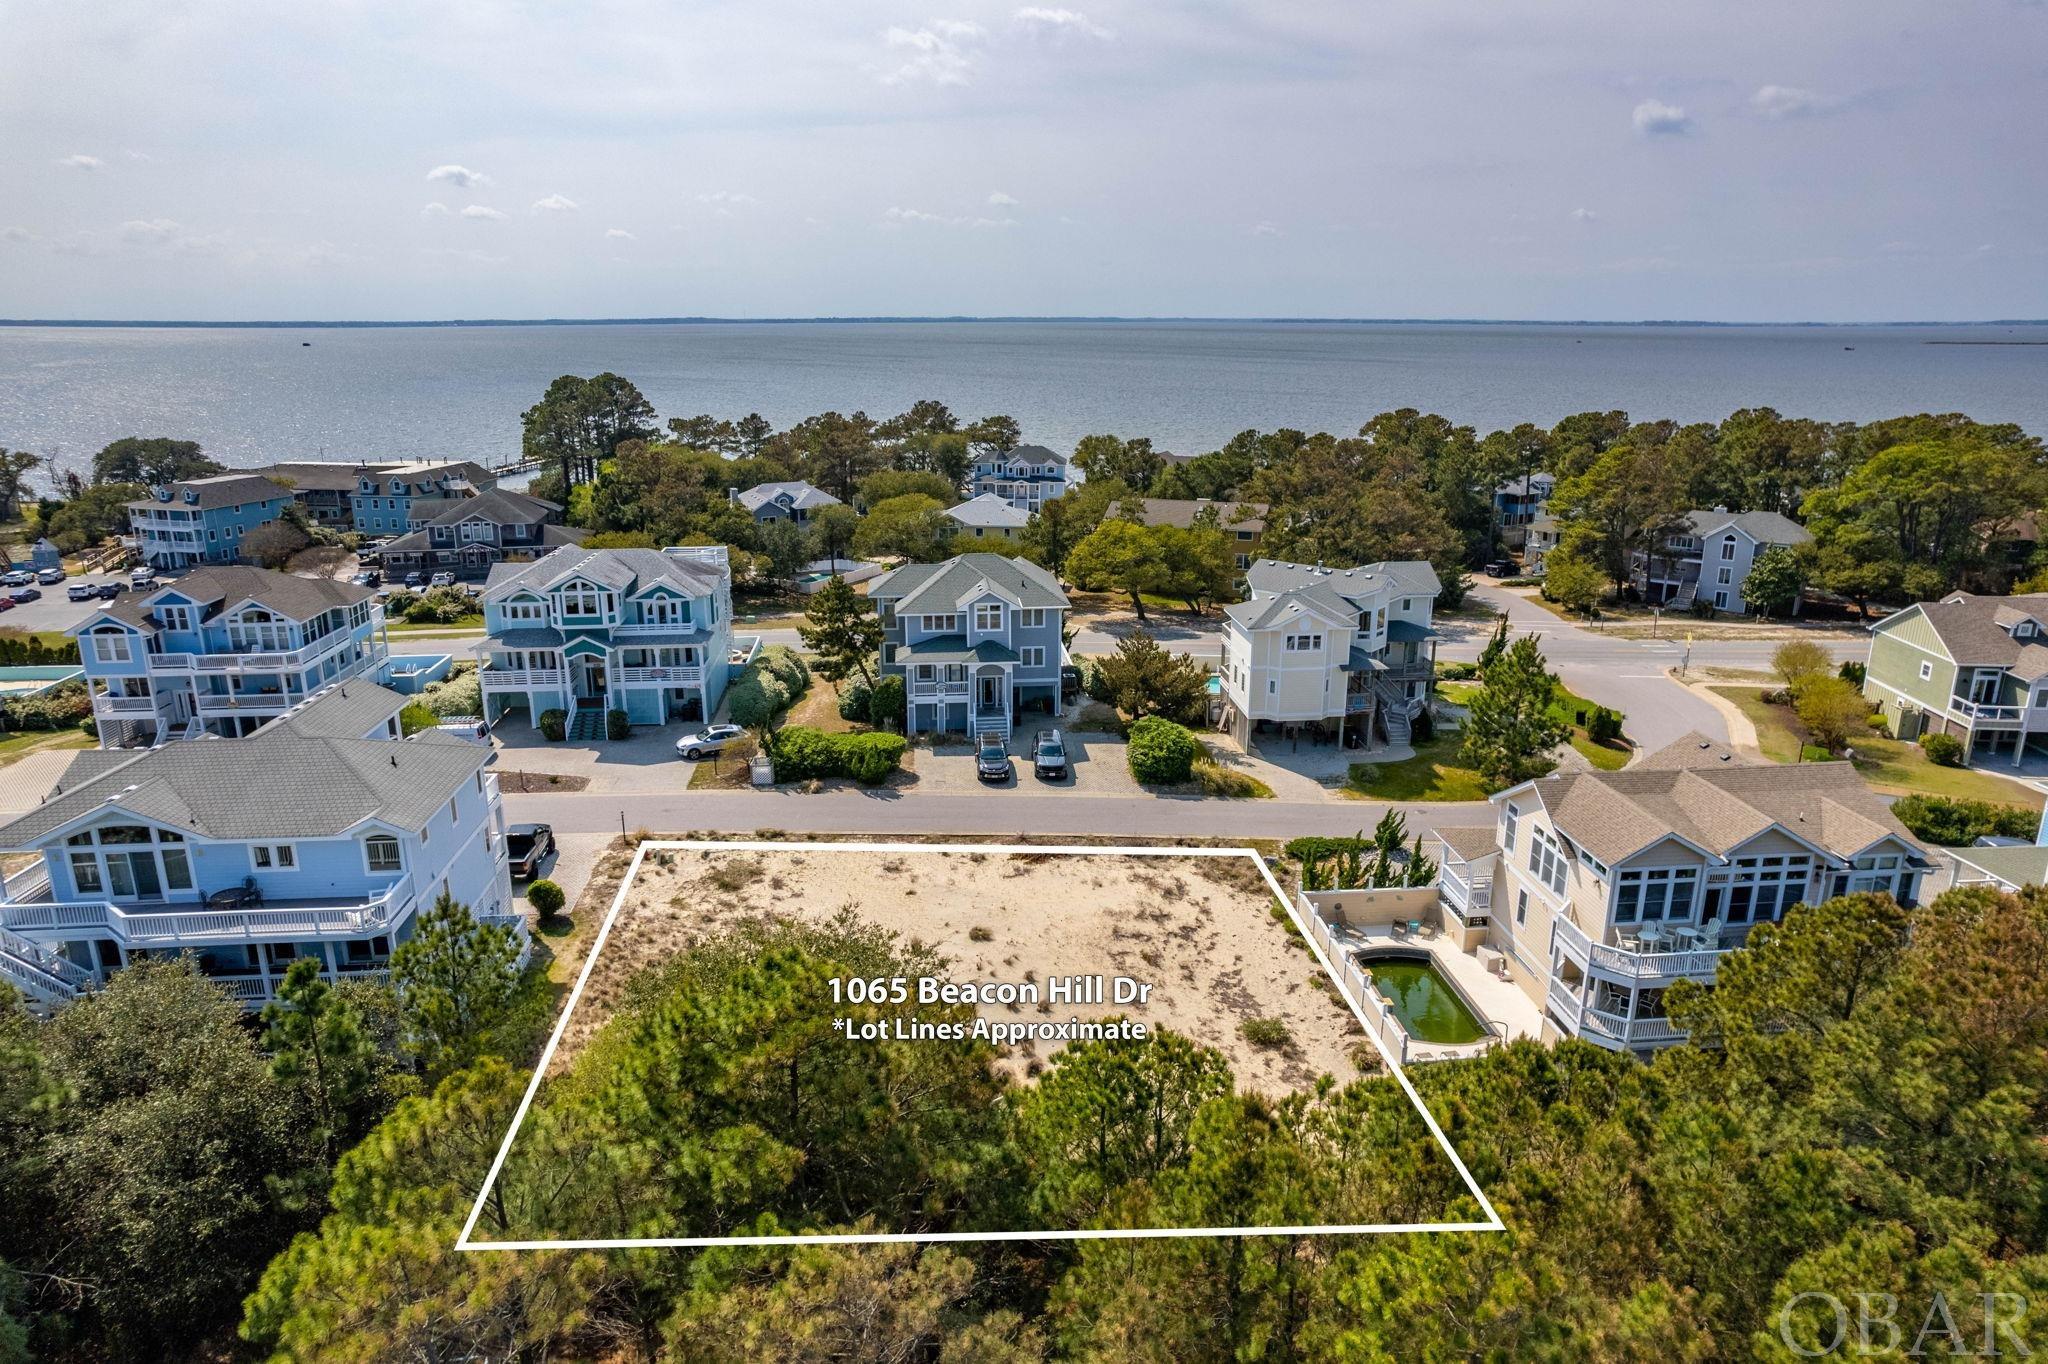 Fantastic, elevated building site available in the renowned community of Corolla Light Resort.  Ocean and sound views possible from the top level of your custom built home.  Located on an X flood zone lot, this desirable high and dry site includes all the Corolla Light Resort amenities discerning owners and vacationers appreciate.  With amenities from ocean to sound, homeowners and their guests have access to the Oceanfront Complex with beach access and oceanfront grill, Sports Center with indoor pools, tennis courts and workout classes, Sound side pools, piers, and trails, as well as pickleball and tennis courts, bike paths, and seasonal trolley service to name just a few.  (See Assoc Docs for full list of amenities.)  Build a custom home for primary use or as a rental investment complete with the ability to enjoy all the activities that make Corolla Light a premier family friendly destination.  Why settle for a home that only meets some of your expectations?  Build your own dream home just the way you want it!  (See CL CCRs in Assoc Docs for building guidelines.)  This property is conveniently located near the boutique shopping, restaurants and attractions of the northern beaches including the Currituck Lighthouse, Whalehead Club, and the famous Corolla wild horses in the 4-wheel drive area.